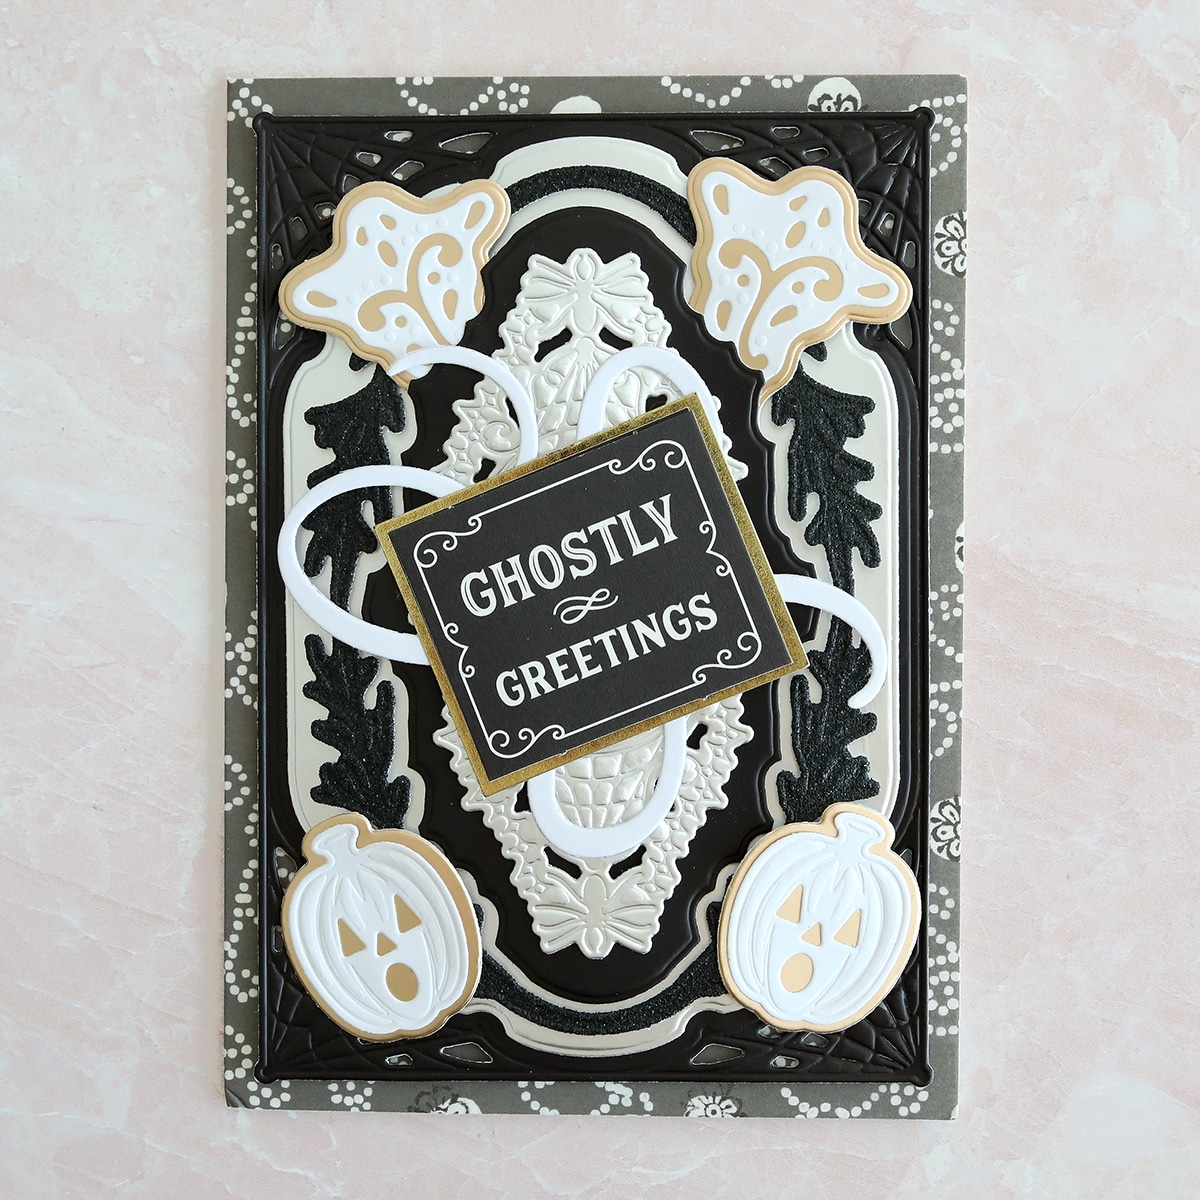 A black and white card with ghostly greetings on it.